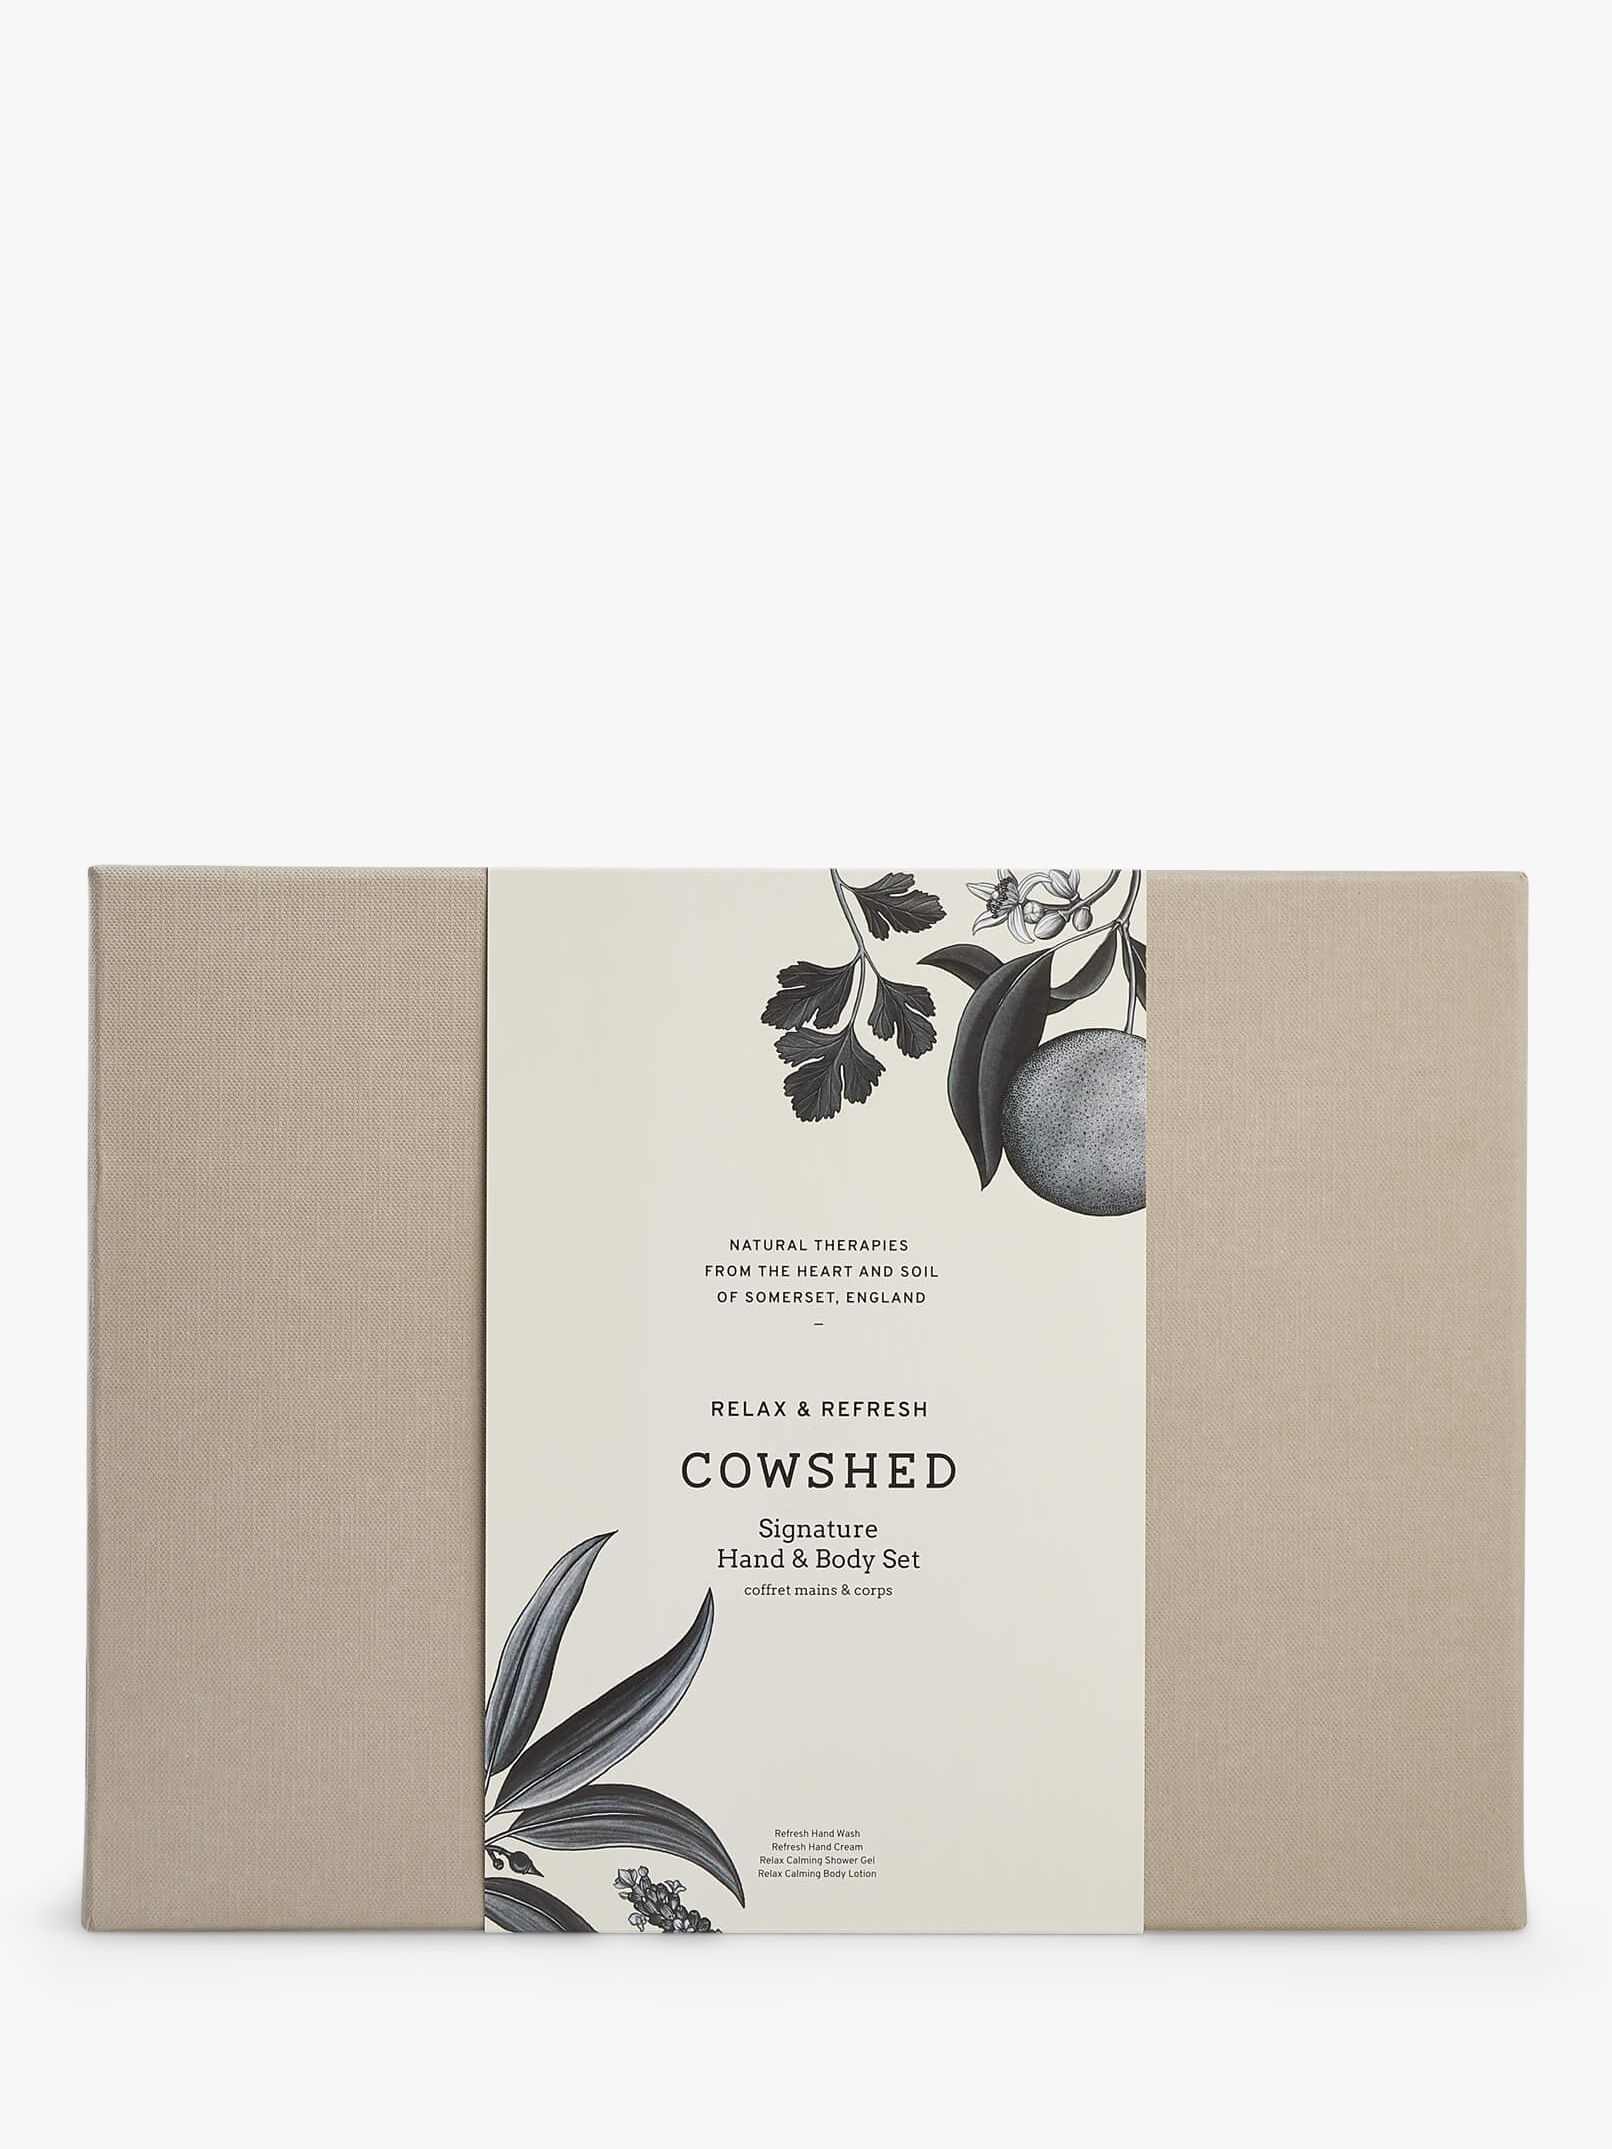 Cowshed Signature Hand & Body Collection Bodycare Gift Set 2